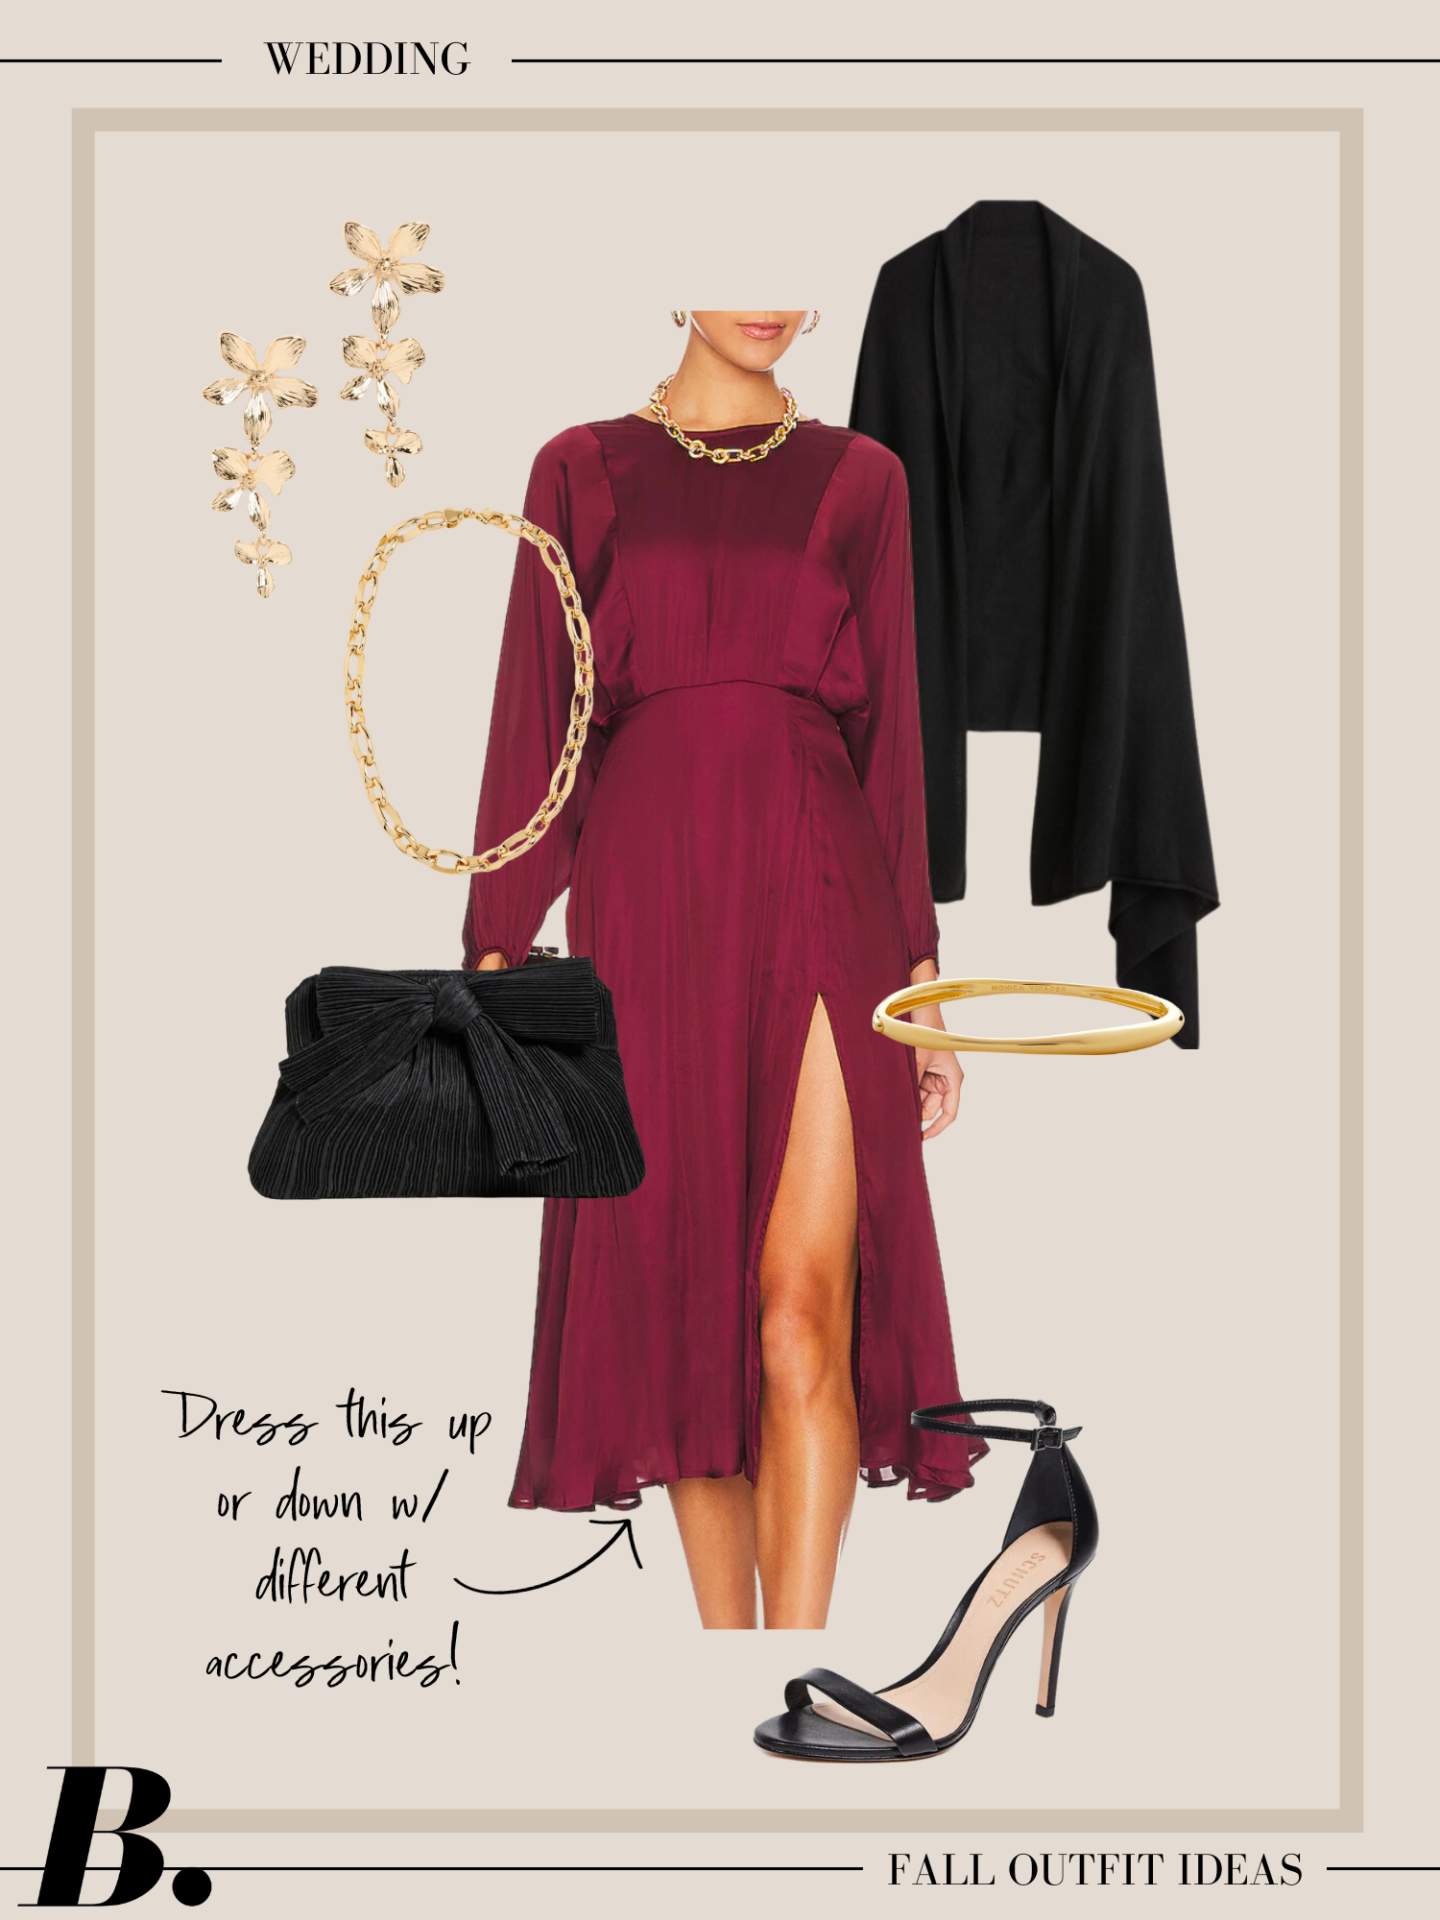 Wedding Fall Outfit Ideas & Occasions